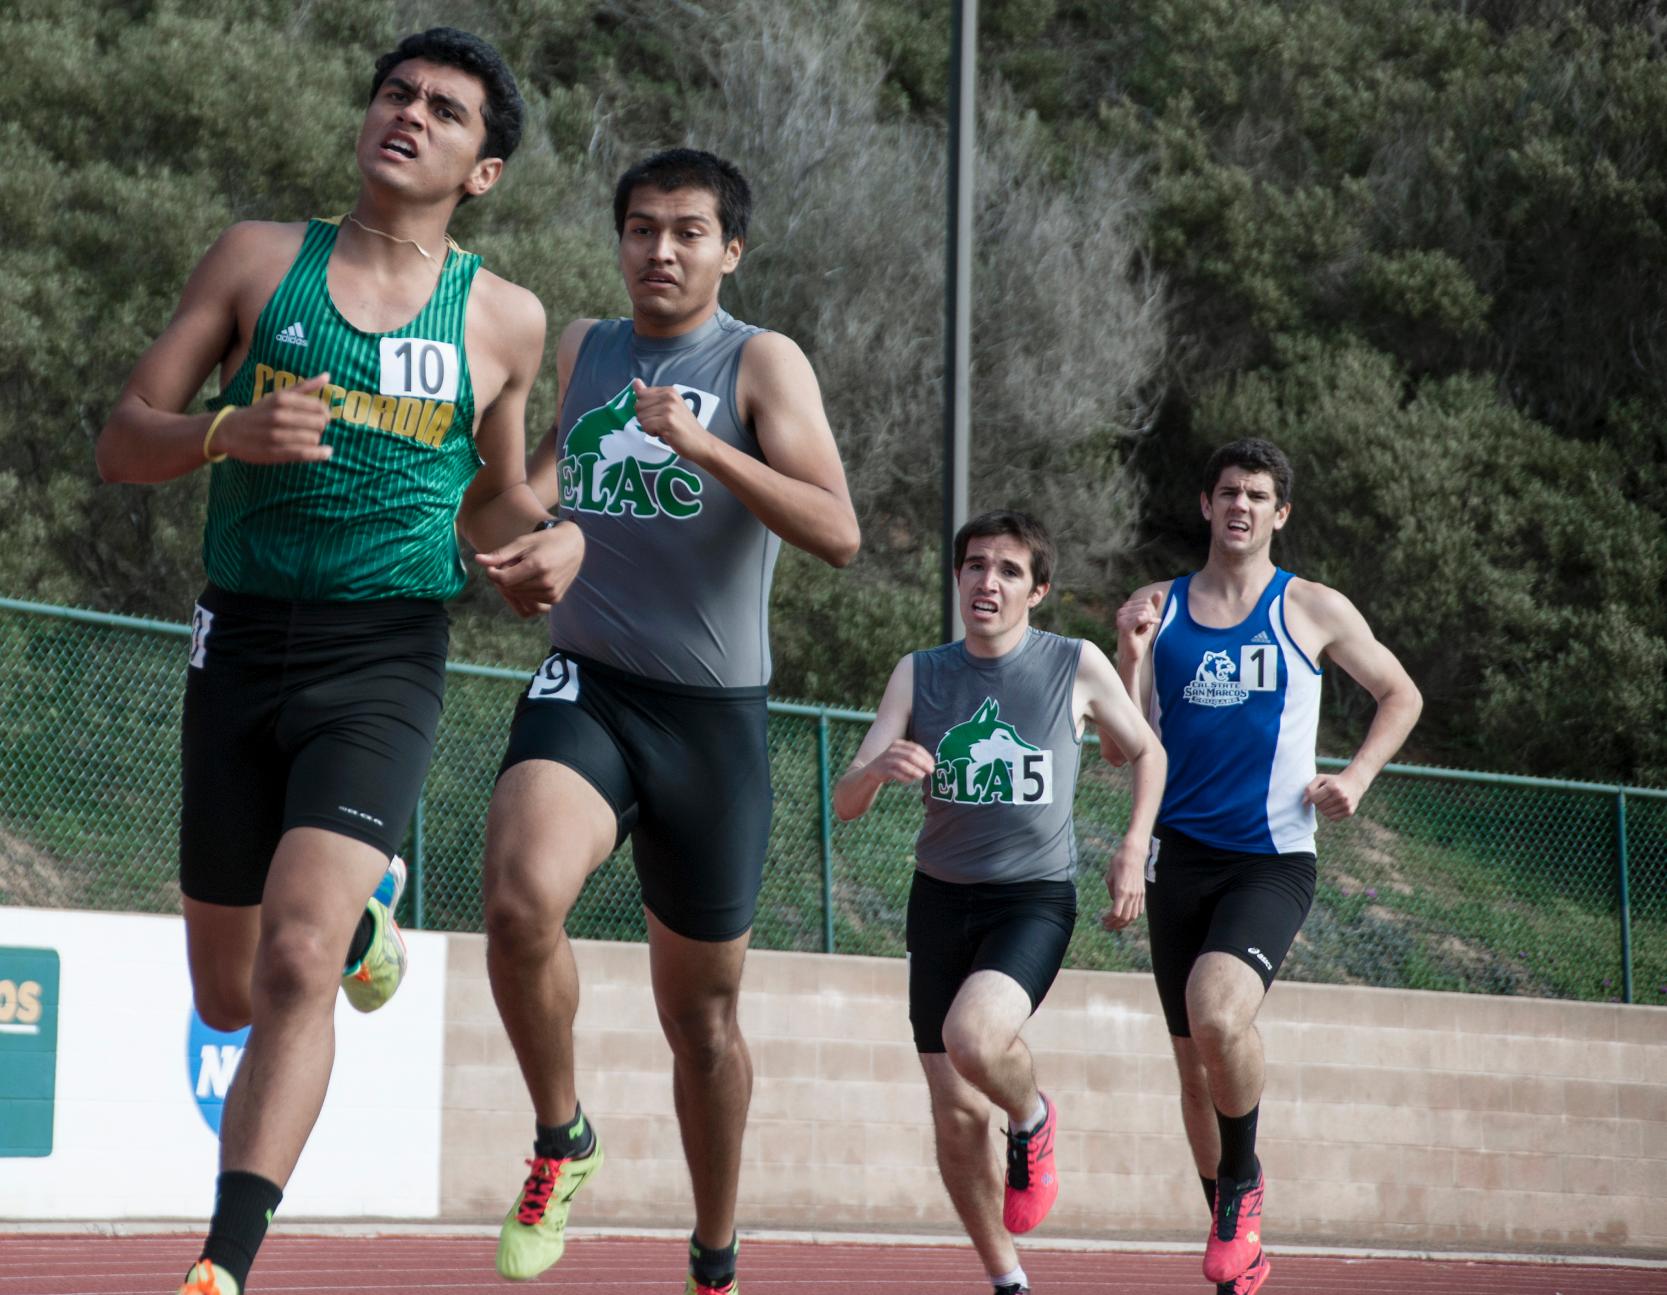 East Los Angeles College sophomores Augustine Arias, center left, and Fernando Jauregui run the last lap in the 800-run at the 2016 Ross and Sharon Irwin Collegiate Meet at Point Loma Nazarene University in San Diego on March 19.